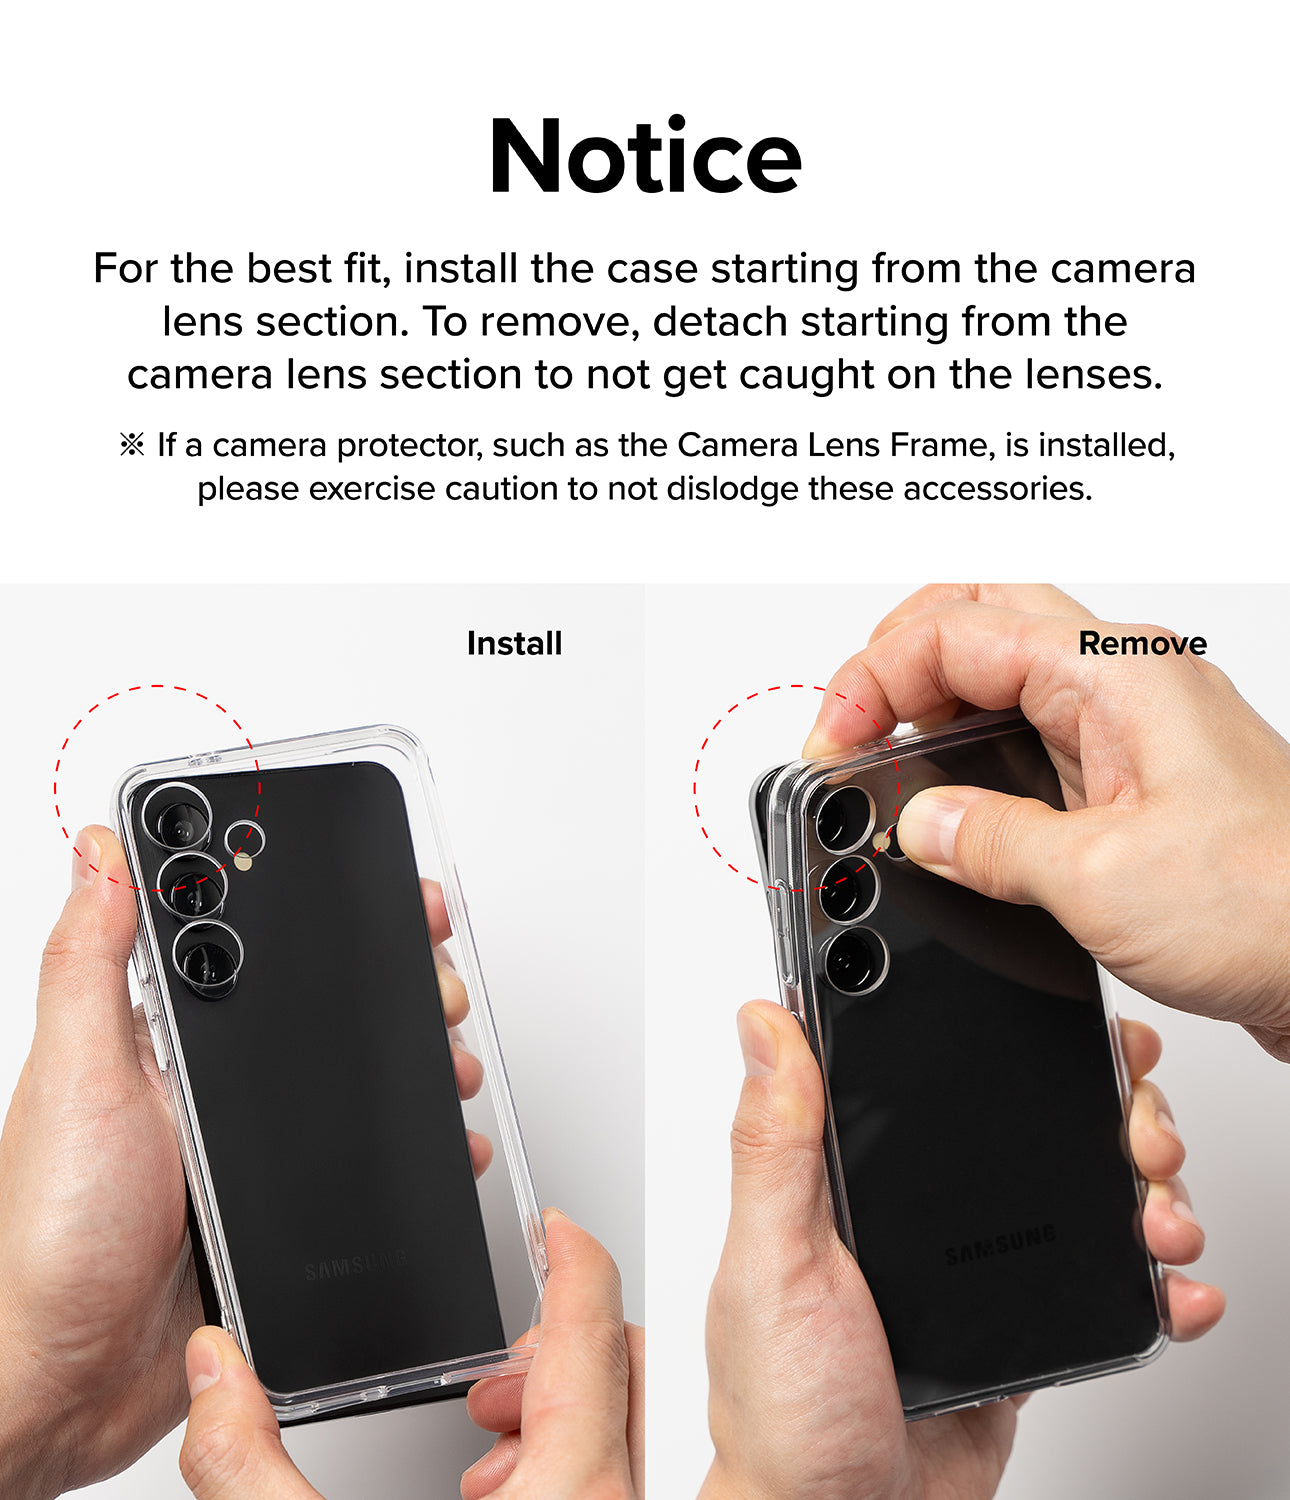 Galaxy A35 Case | Fusion-X - Notice. For the best fit, install the case starting from the camera lens section. To remove, detach starting from the camera lens section to not get caught on the lenses.